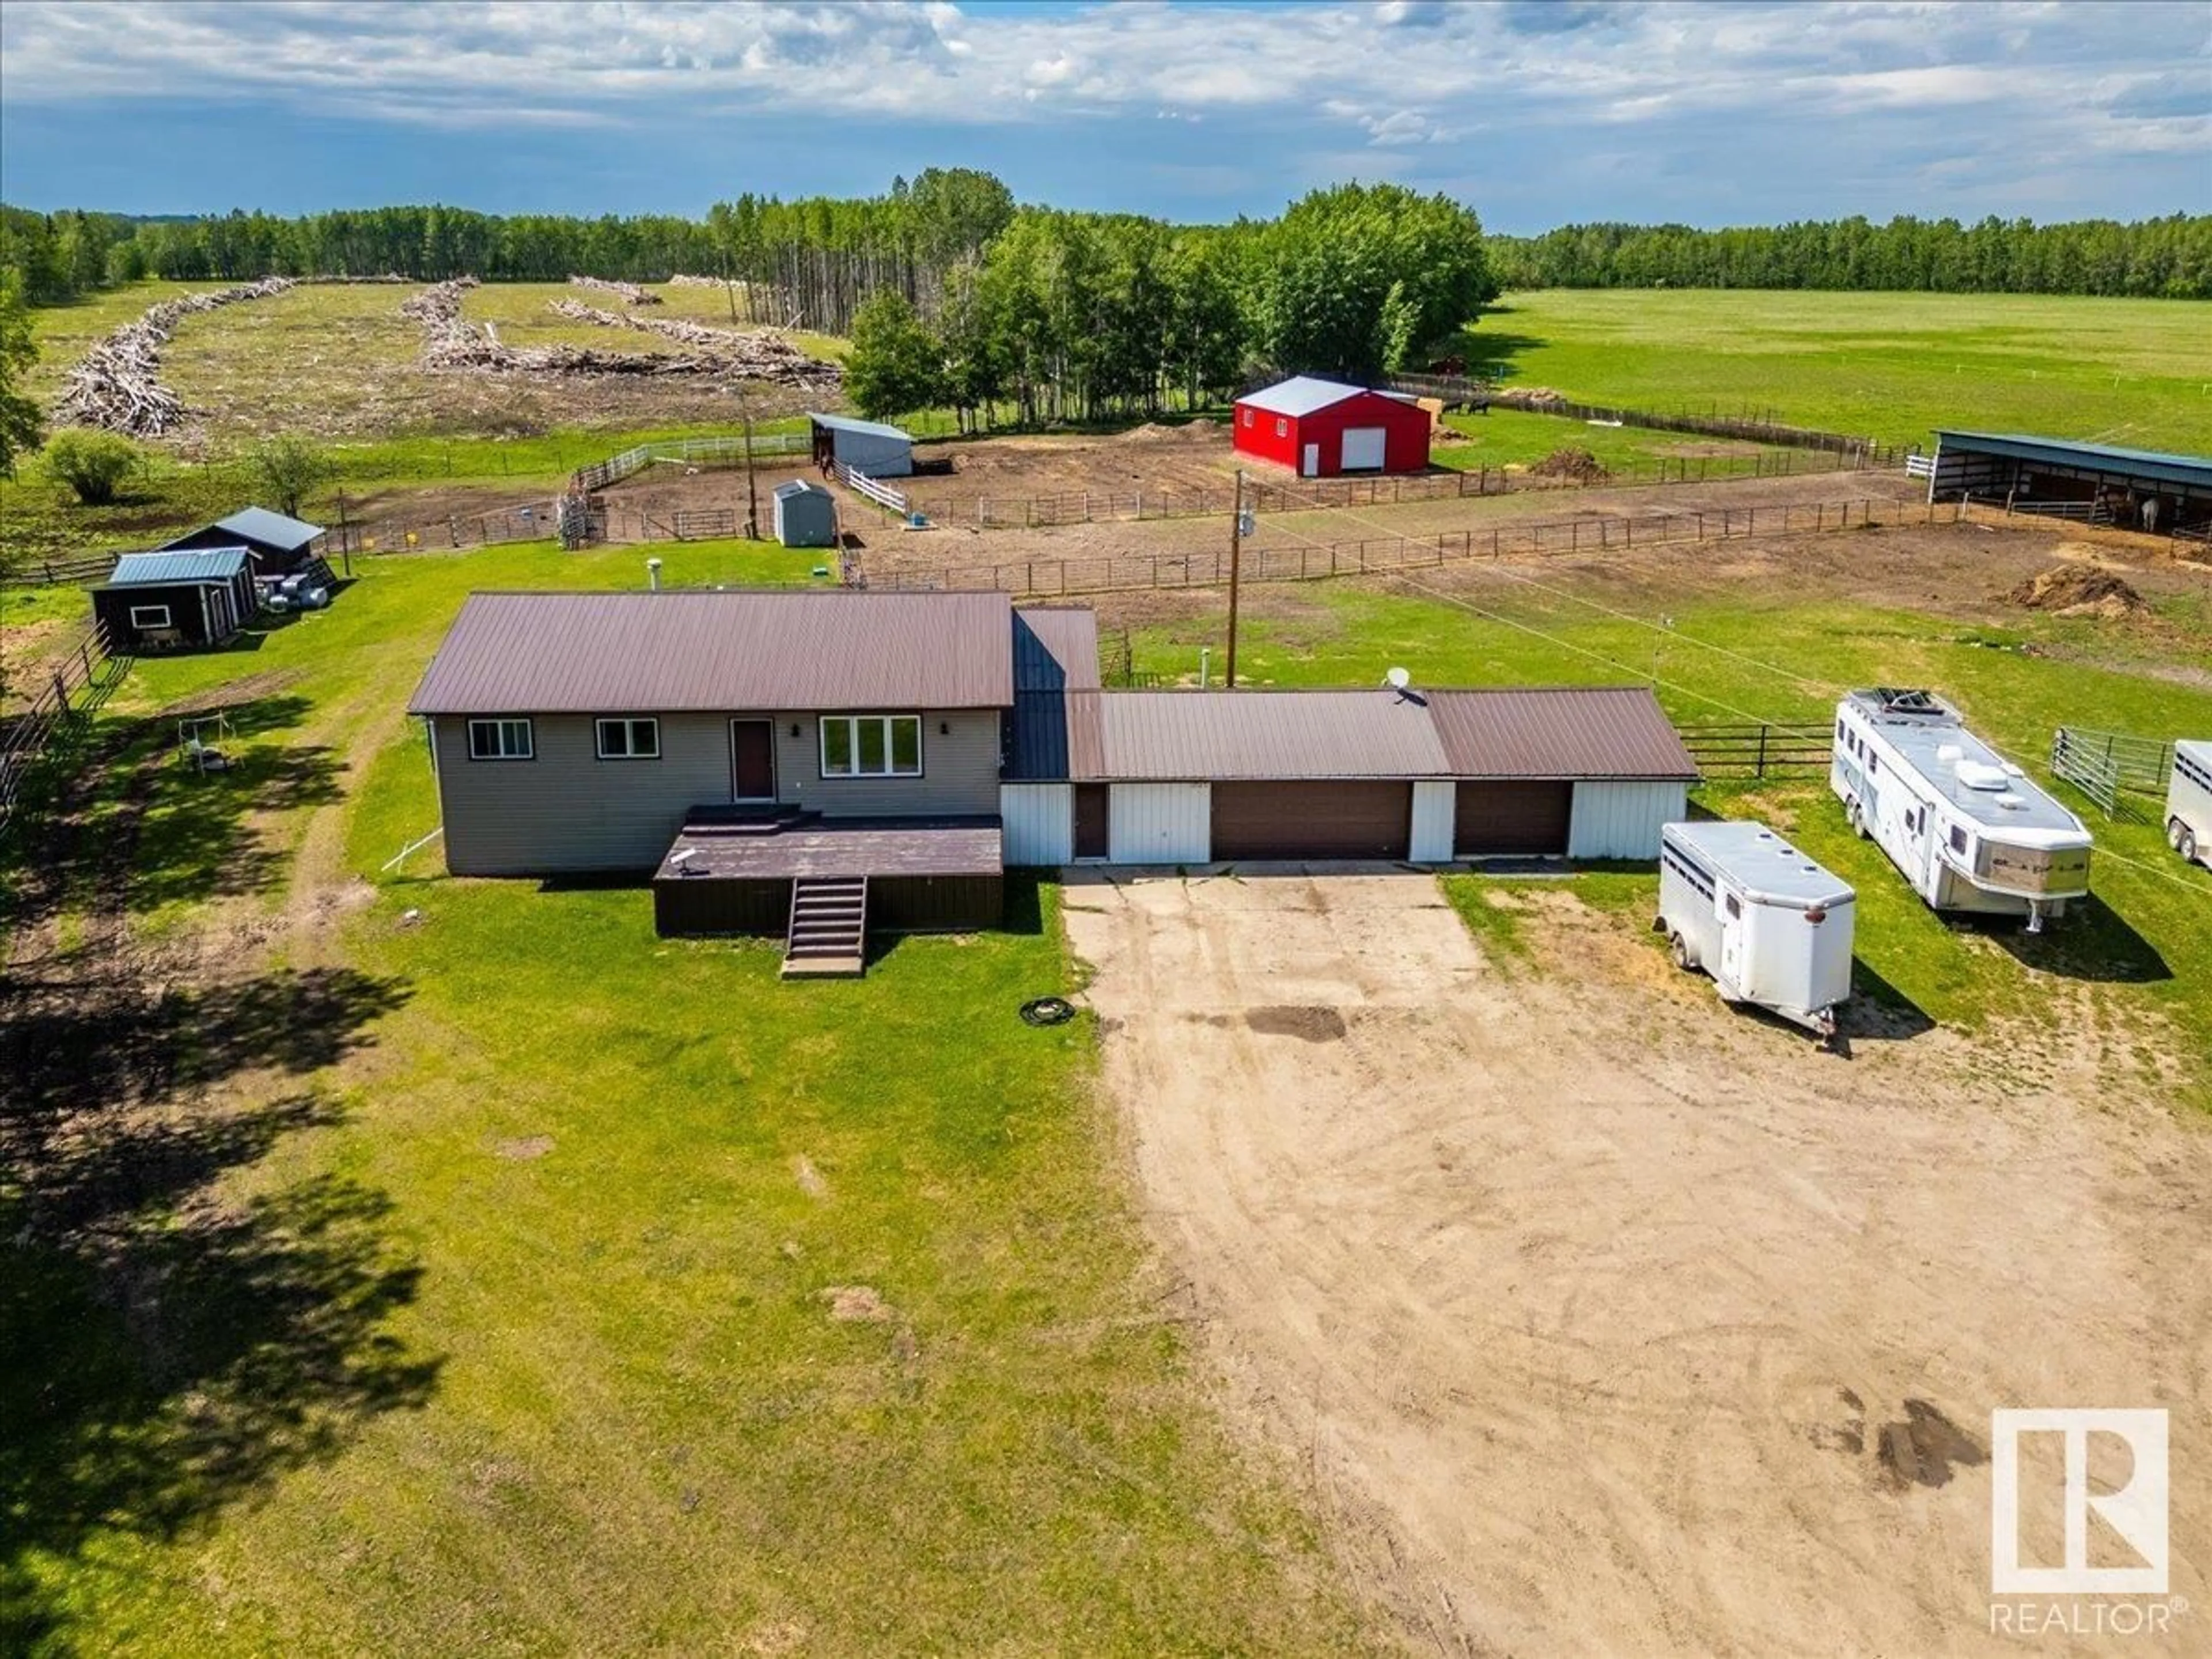 Frontside or backside of a home for 48504 Rge Rd 24, Rural Leduc County Alberta T0C2T0